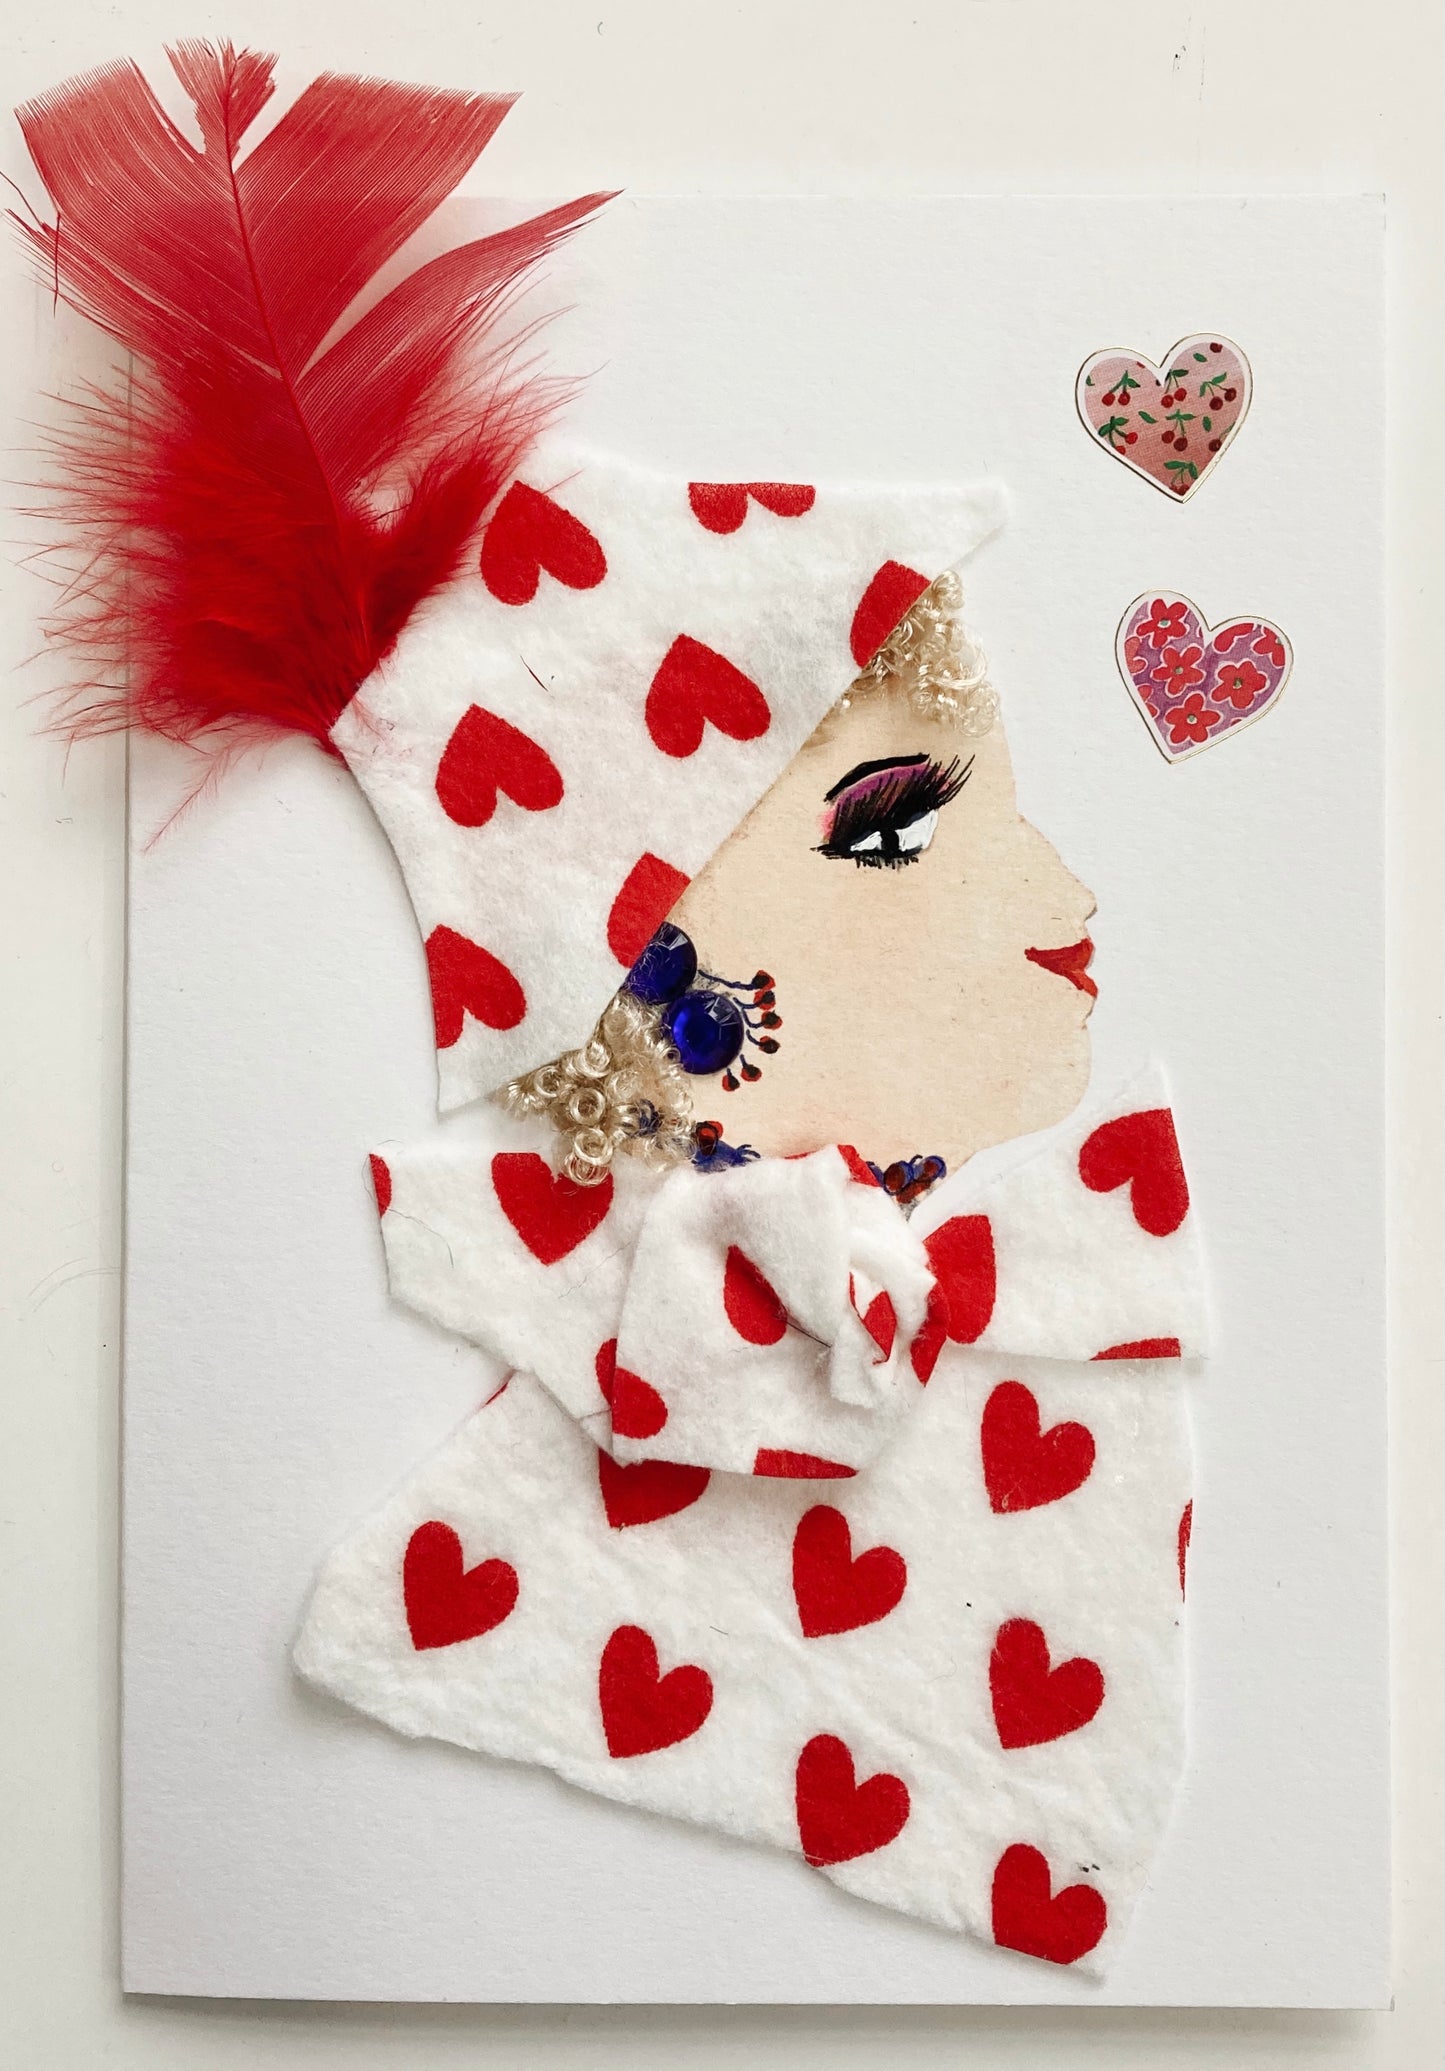 I designed this card of a woman who is named Liliana Liverpool. She has a white skin tone and wears a white hat with red hearts and a red feather coming out the top. She has blonde curls popping out the bottom of the hat. She wears a matching white blouse with read hearts all over. She wears navy blue gem jewellery. There are two hearts above her head that are both pink and red. 